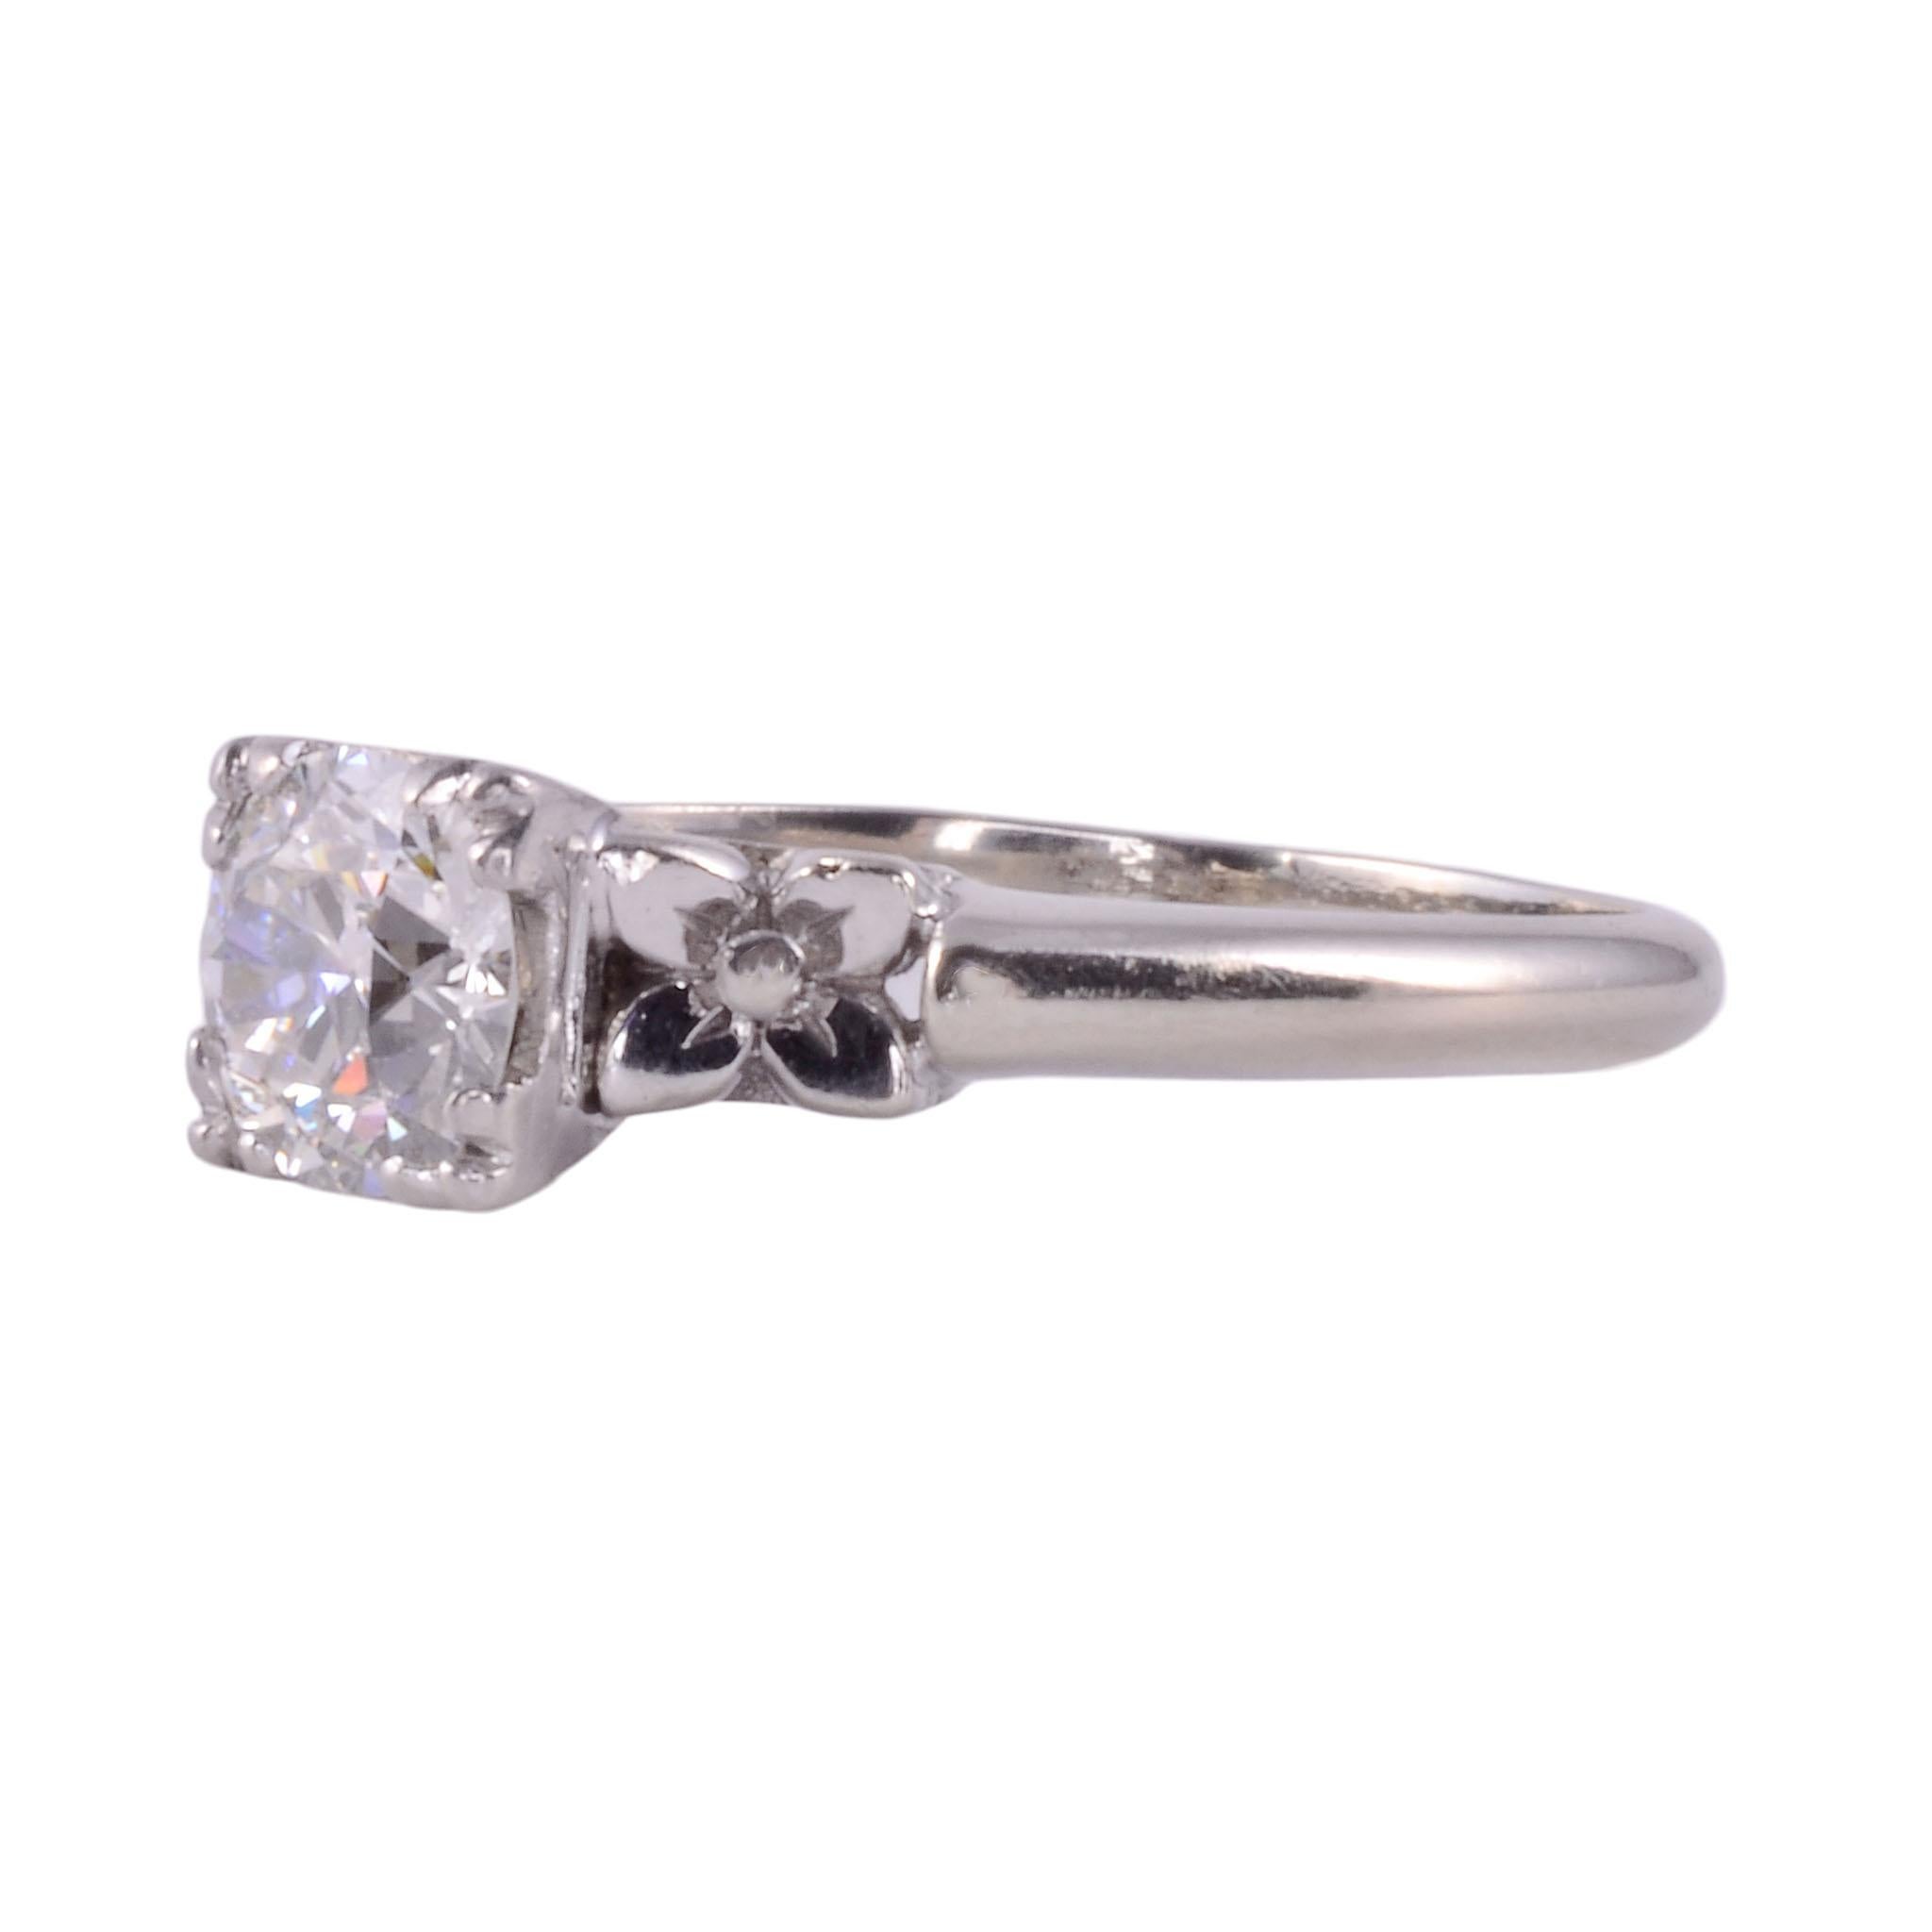 Antique Art Deco diamond 14KW engagement ring, circa 1920. This 14 karat white gold ring features a bead set .67 carat center old European cut diamond. This diamond has VS2 clarity and K color. It is accented with .05 carat total weight of old